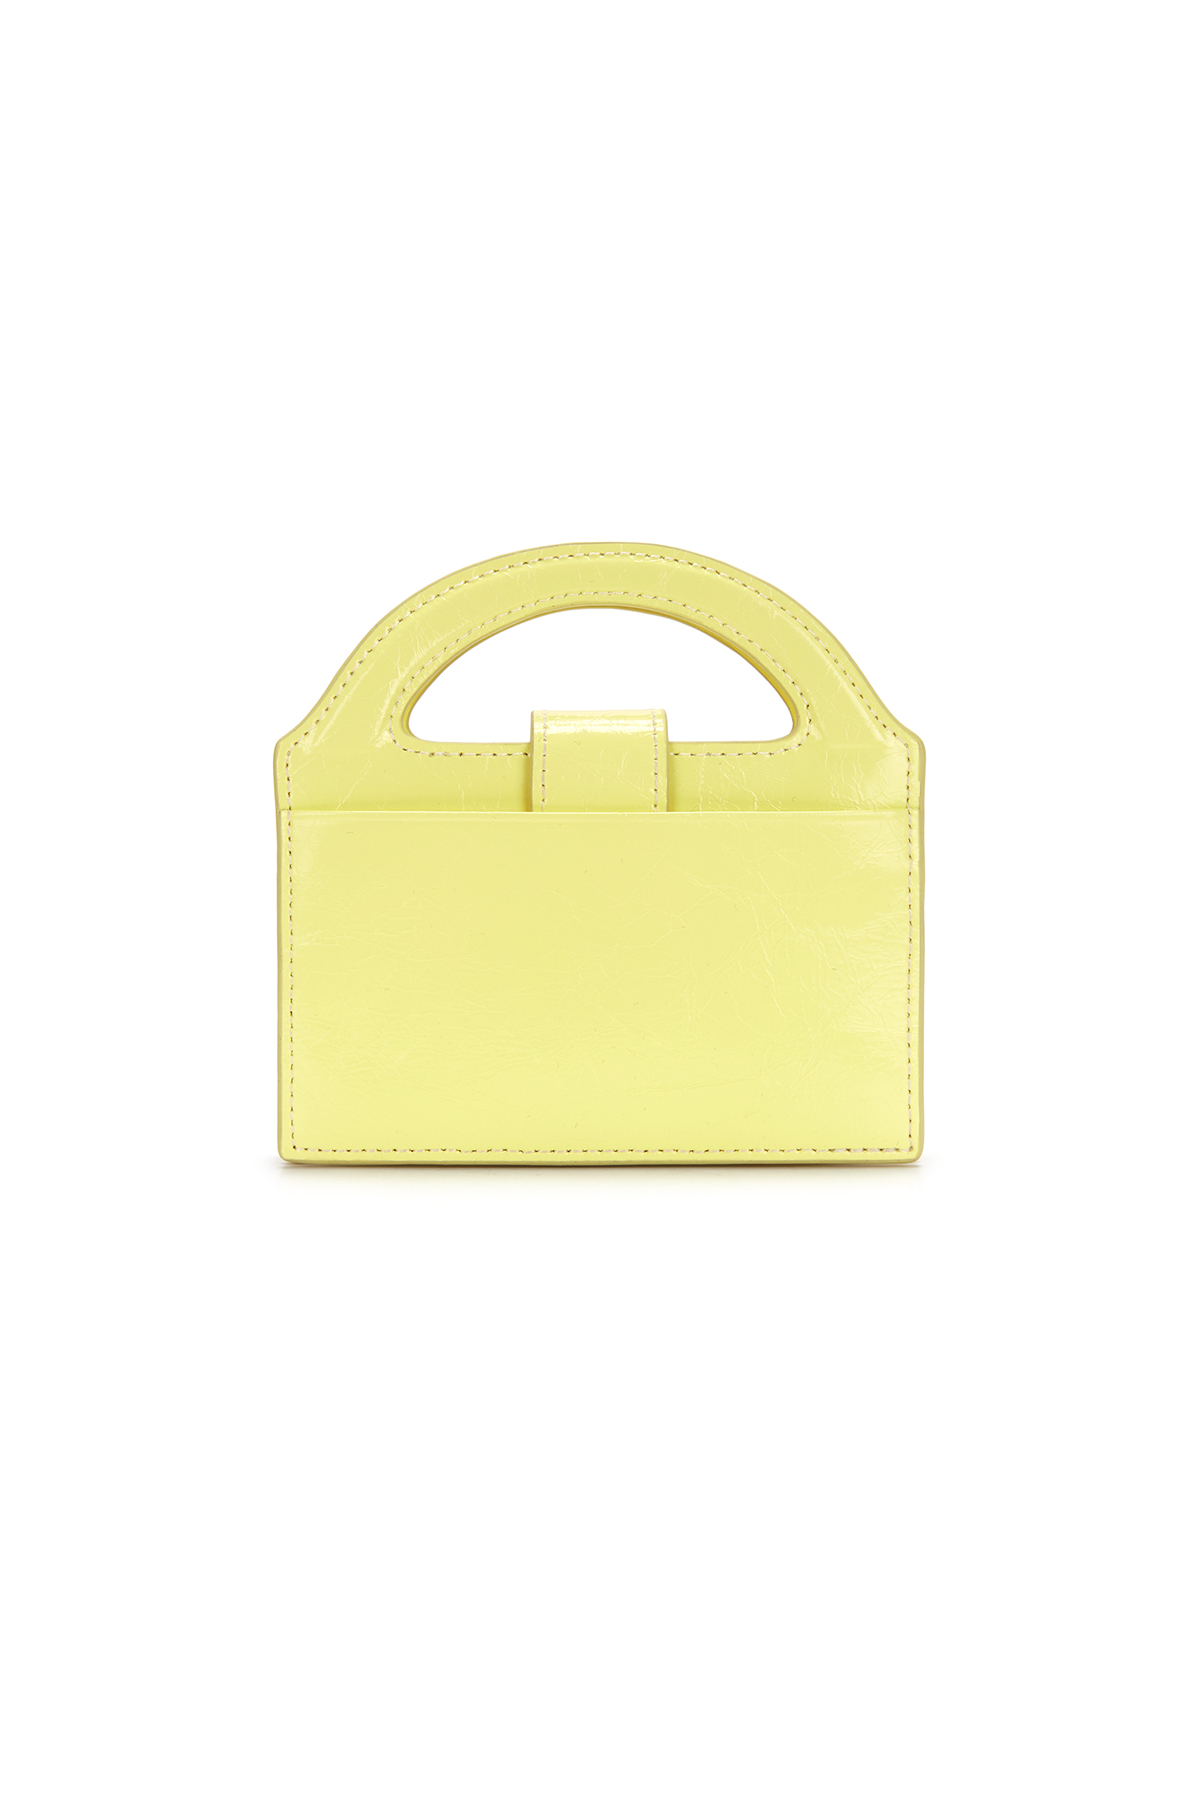 HANDLE ACCORDION CHAIN WALLET IN LIGHT YELLOW